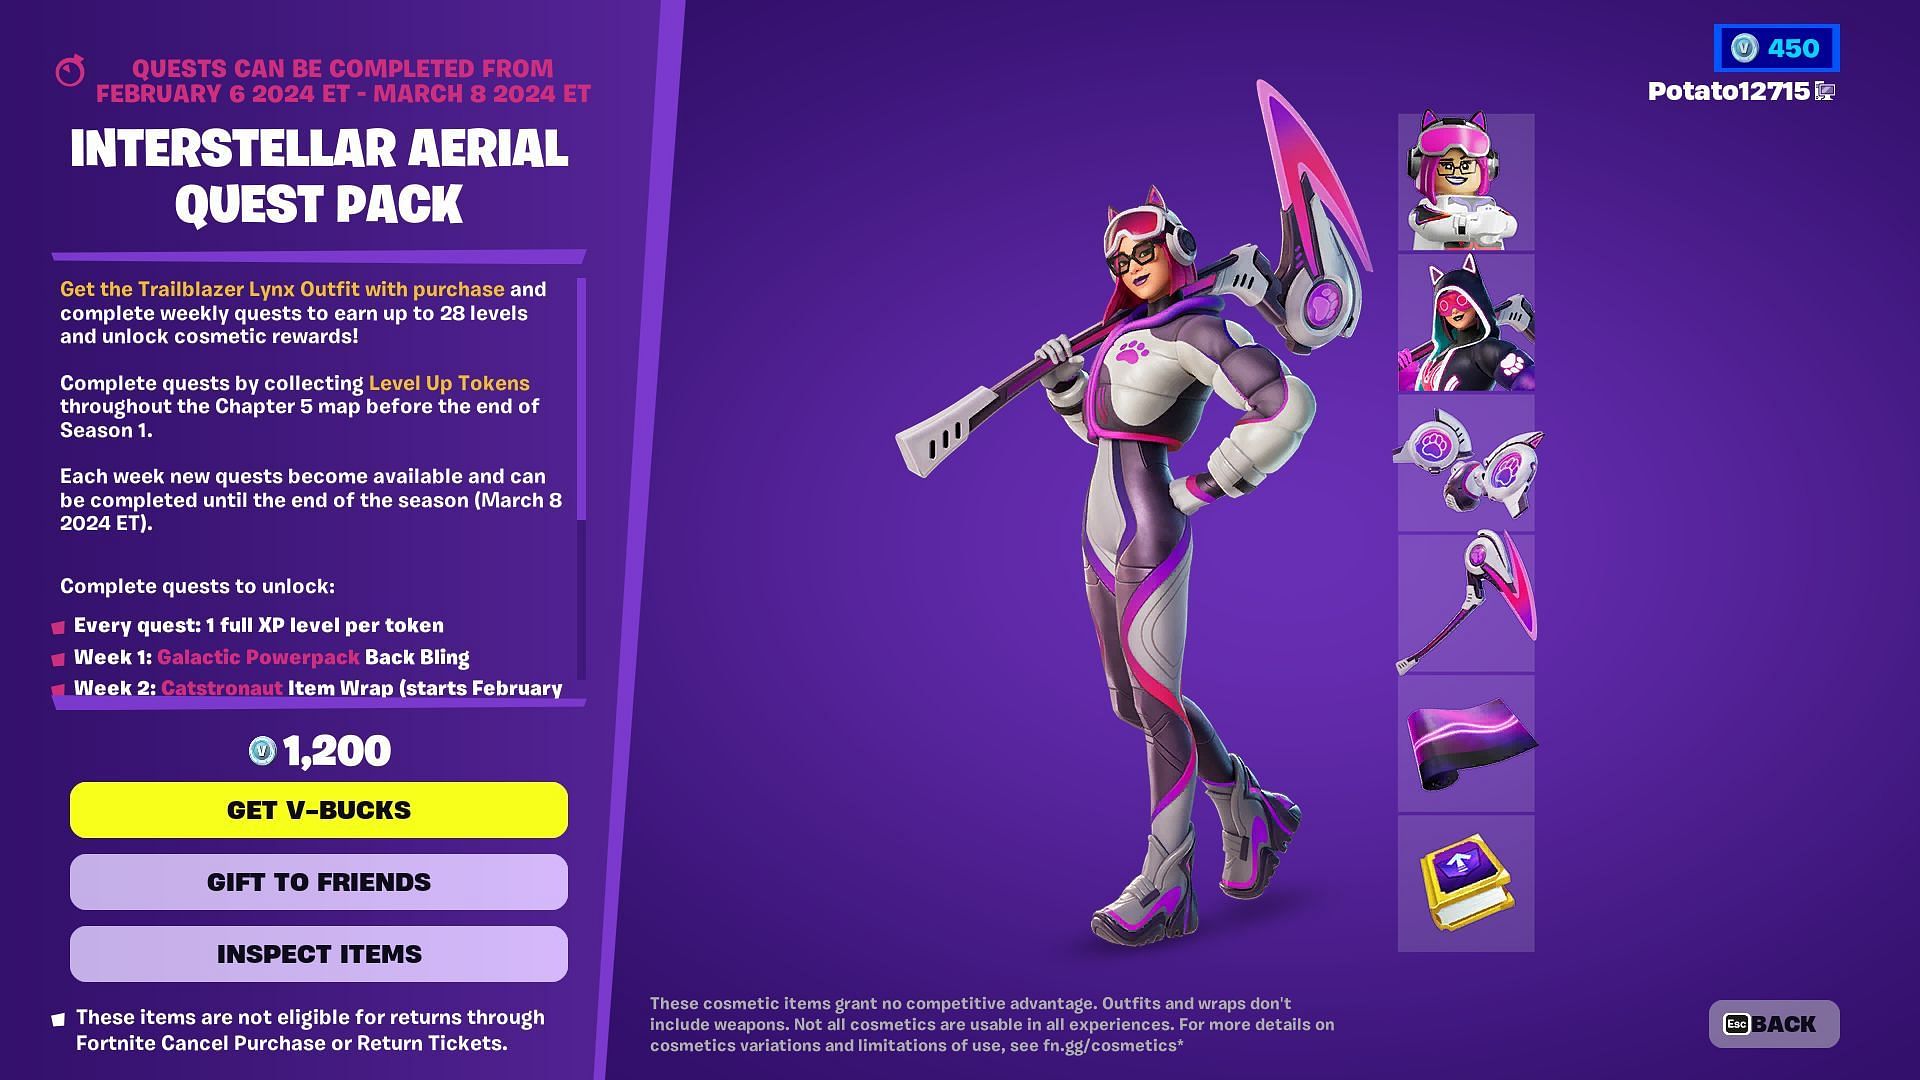 The Interstellar Aerial Quest Pack is currently listed in the Item Shop (Image via Epic Games)